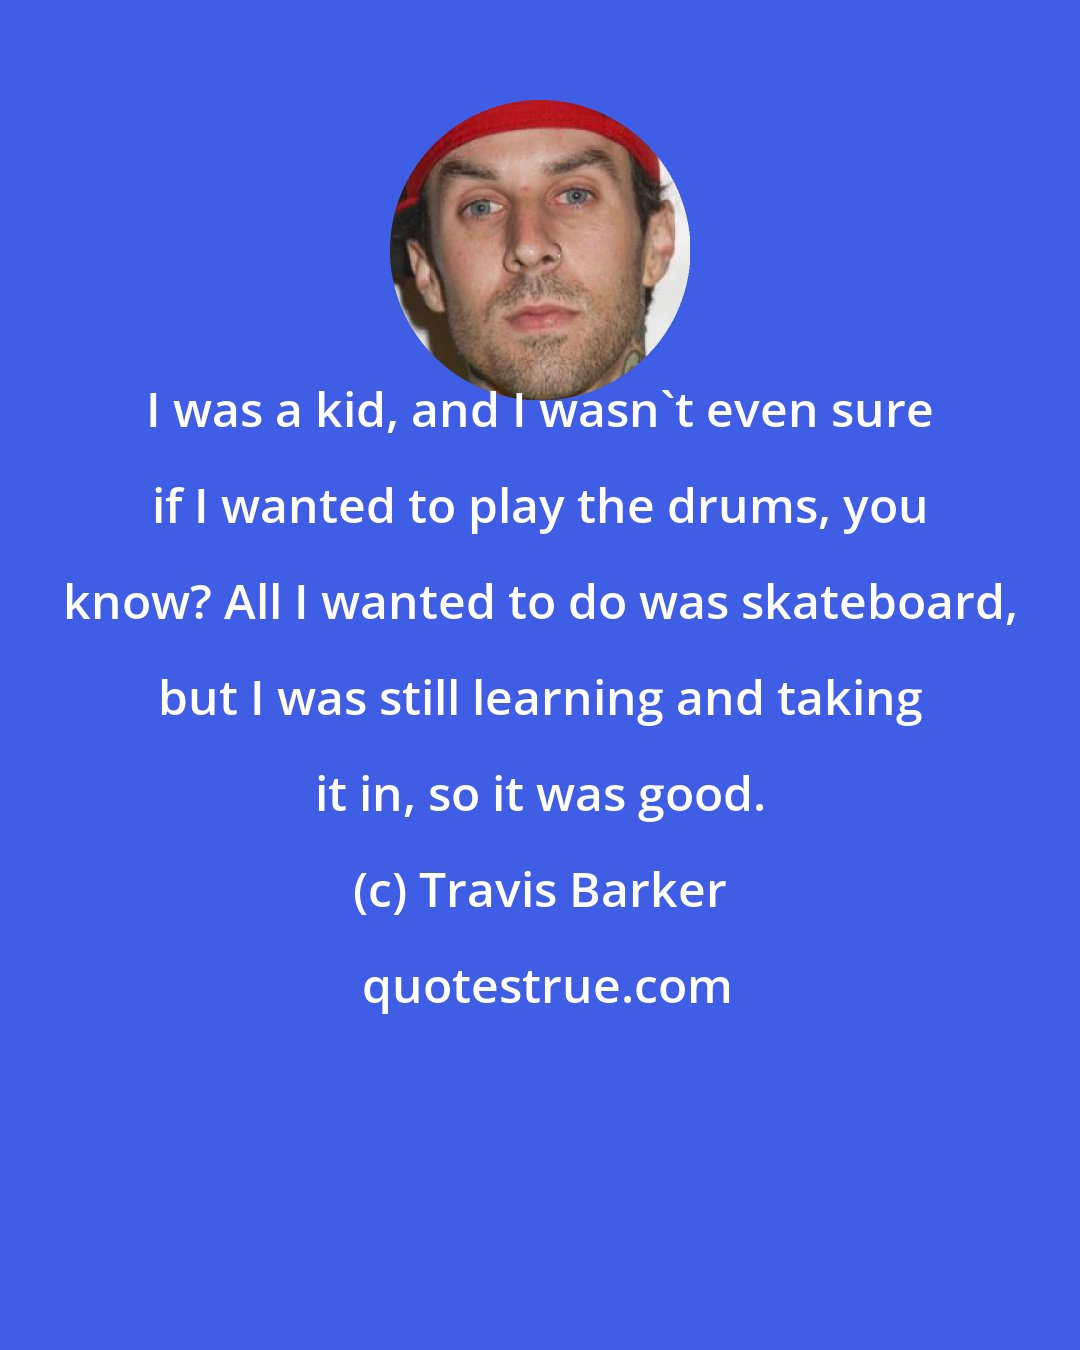 Travis Barker: I was a kid, and I wasn't even sure if I wanted to play the drums, you know? All I wanted to do was skateboard, but I was still learning and taking it in, so it was good.